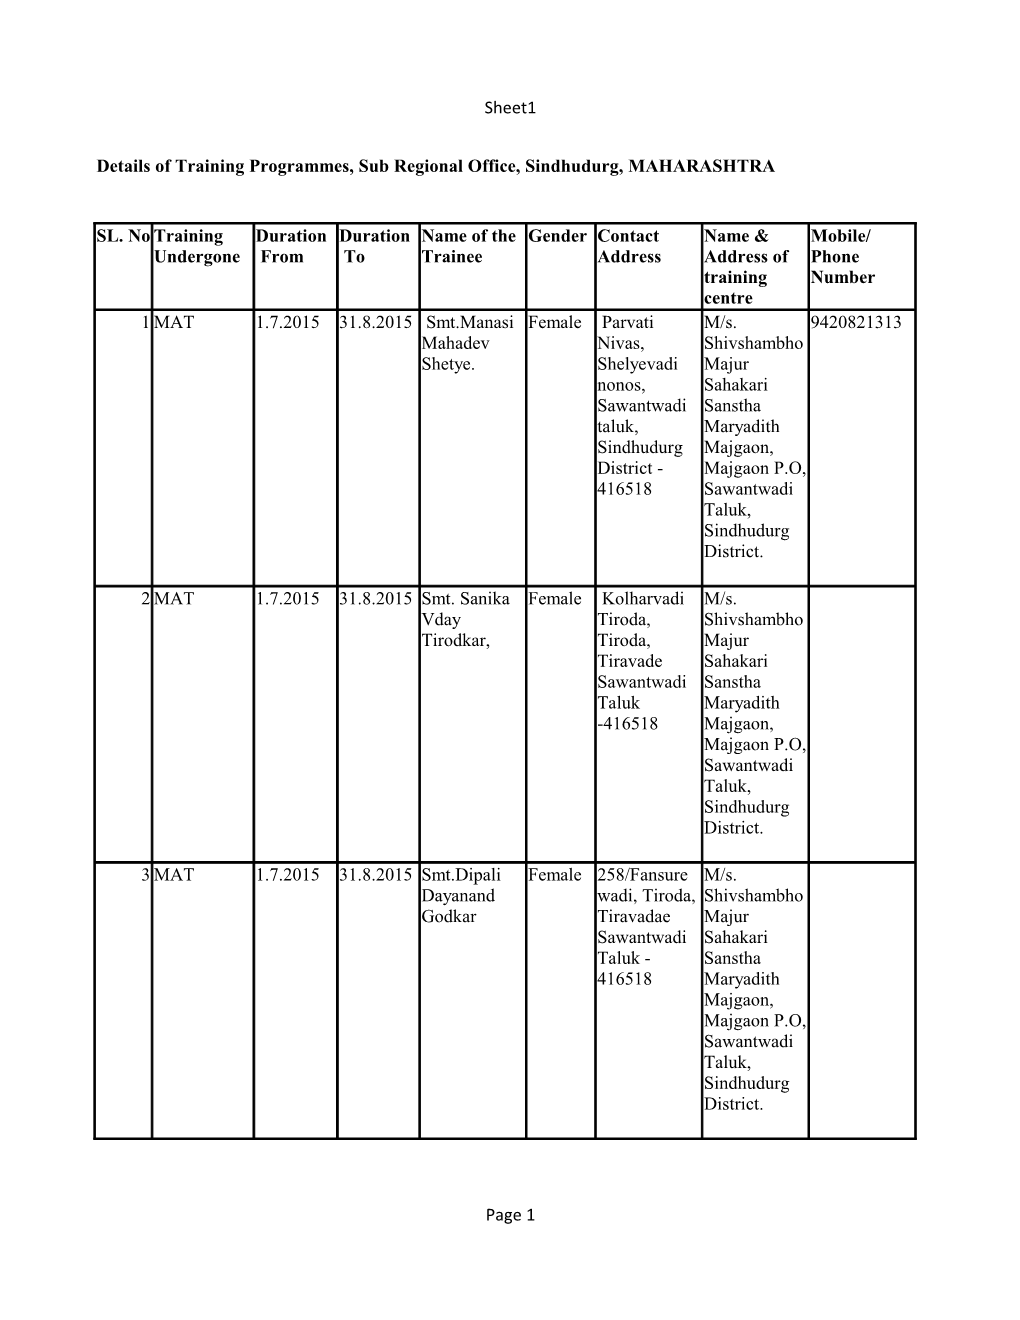 Sheet1 Page 1 Details of Training Programmes, Sub Regional Office